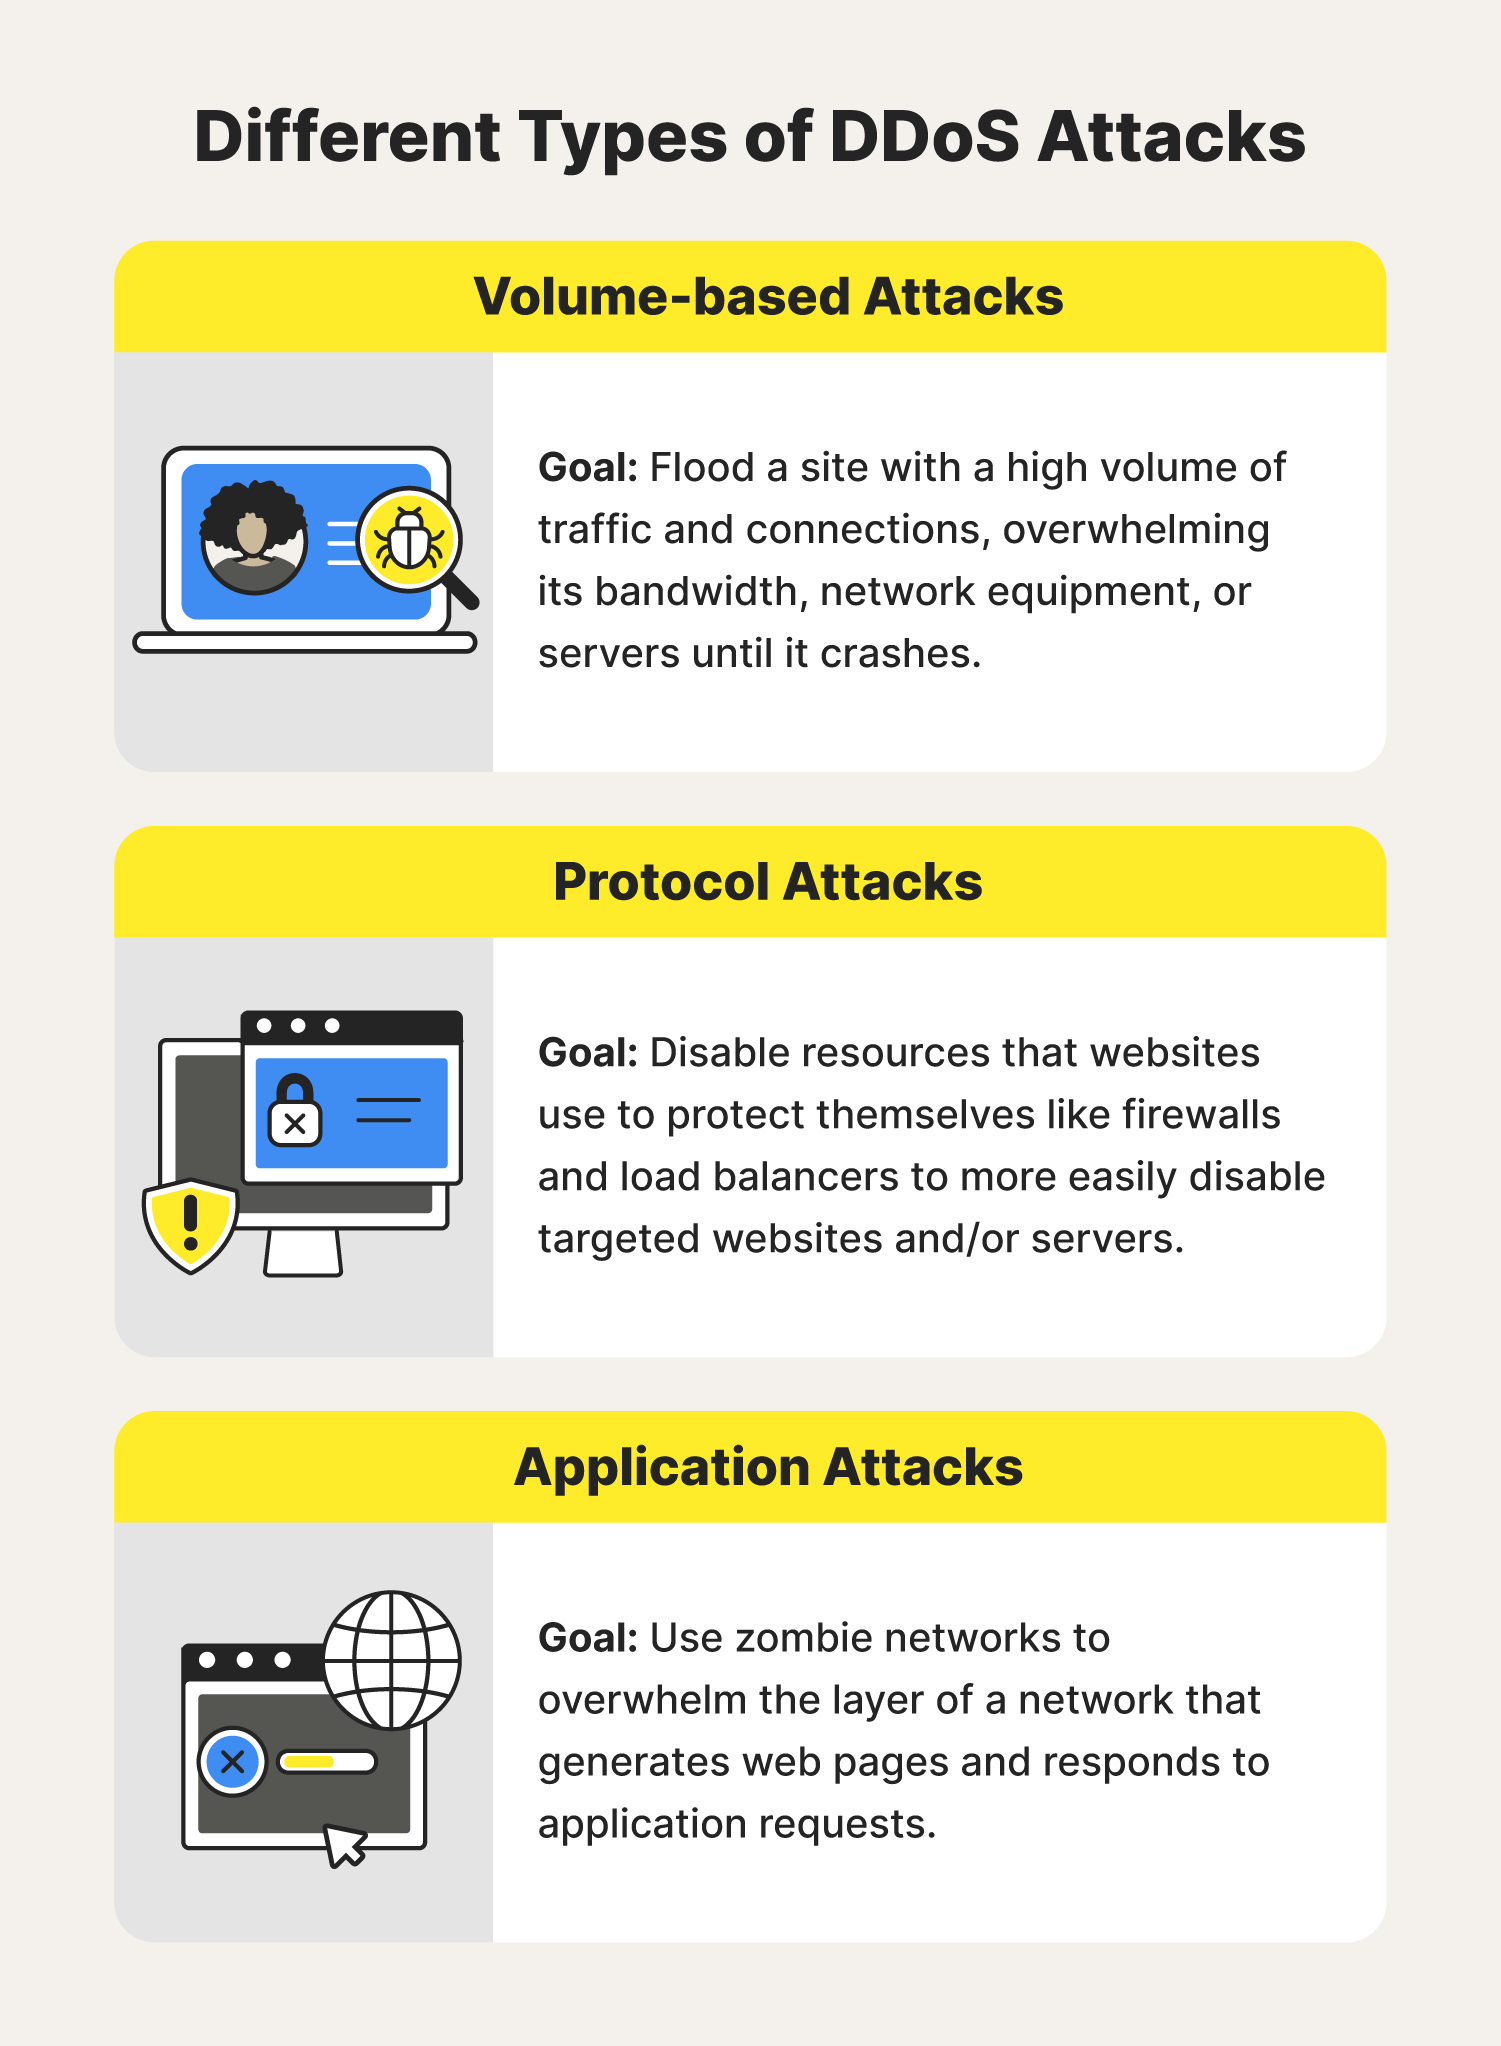 Three illustrations accompany different types of DDoS attacks seen online. 